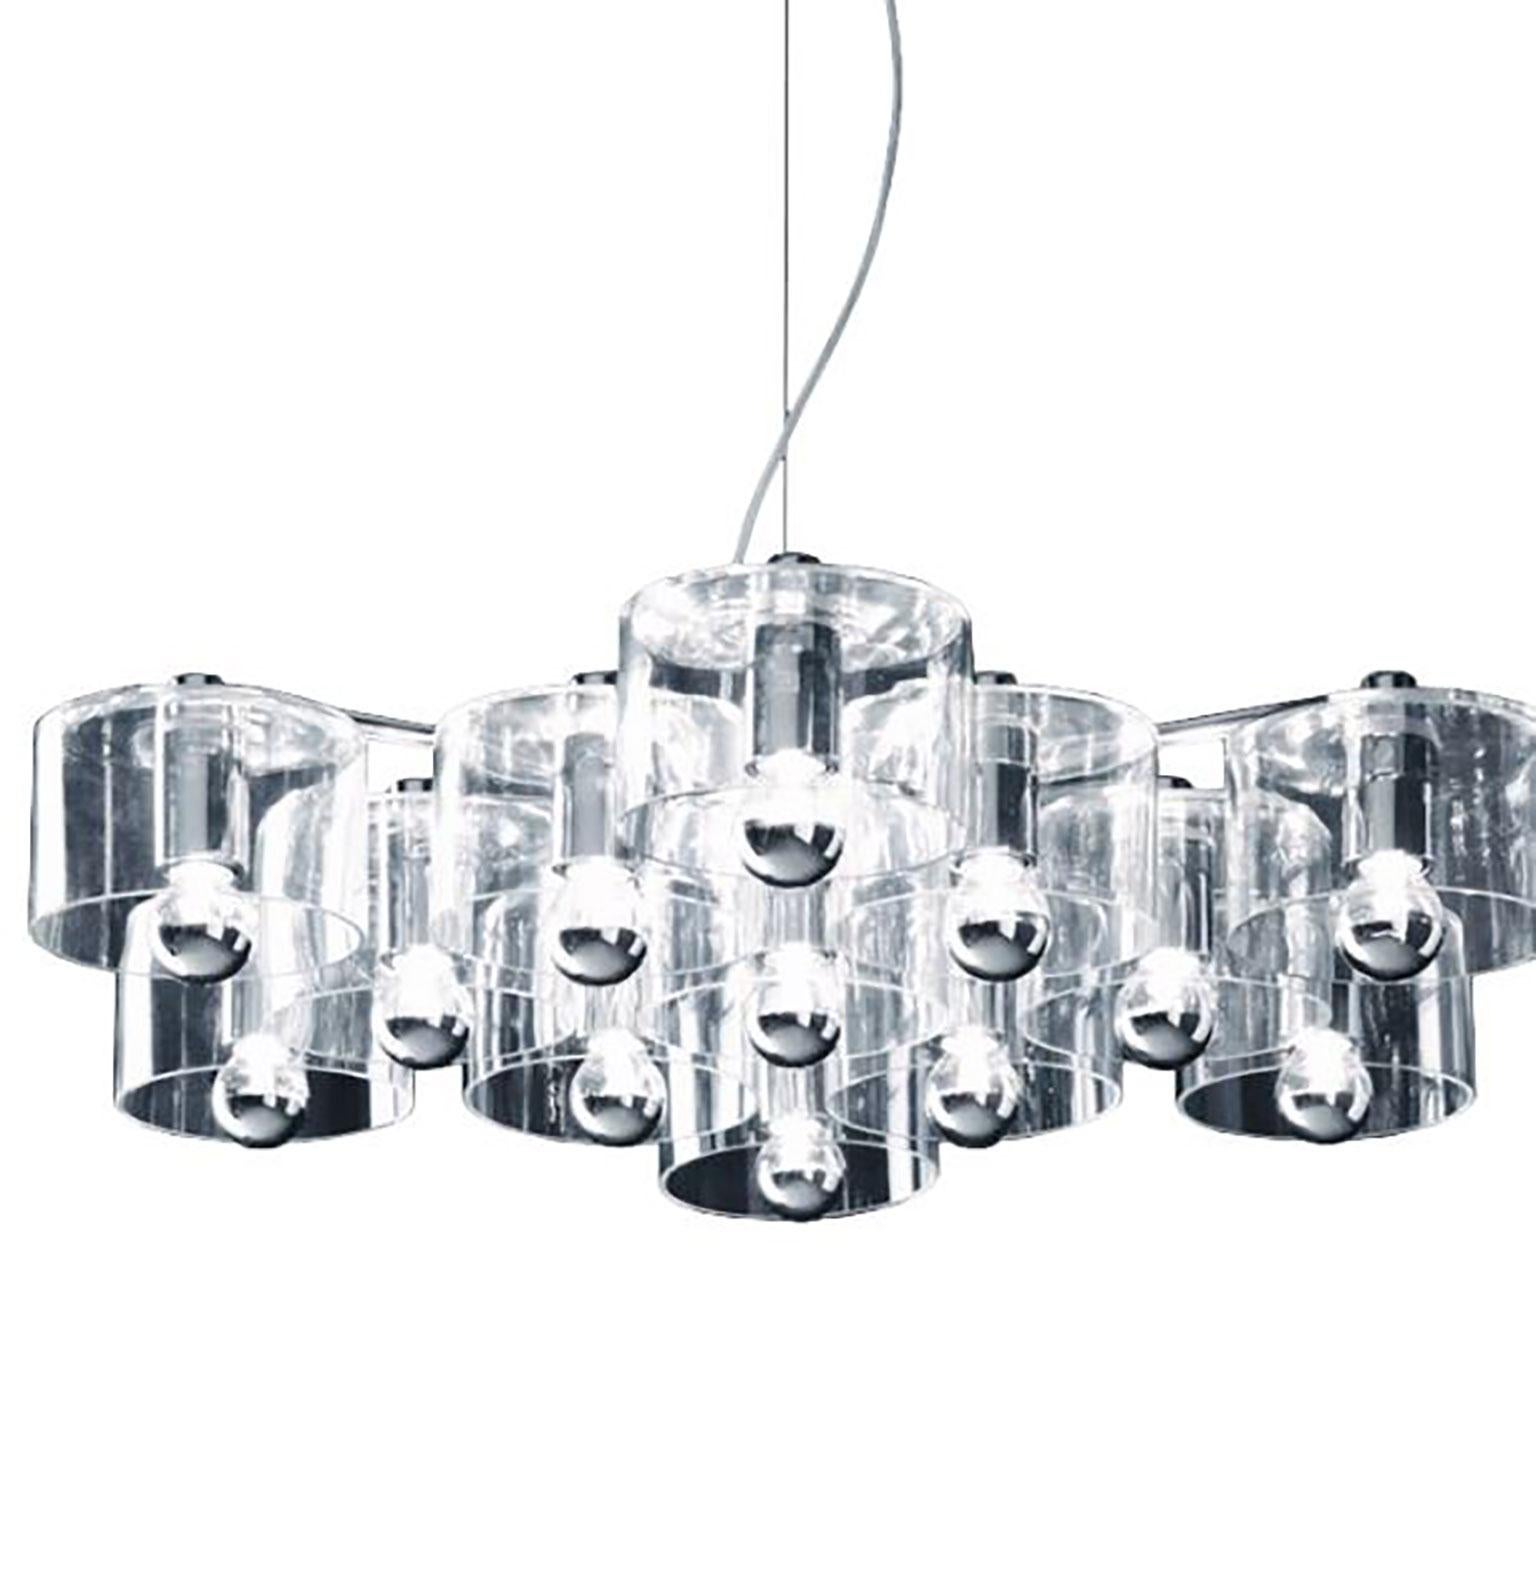 Fiore suspension lamp designed by Marta Laudani & Marco Romanelli for Oluce. The lamp consists of clear glass cylinders that connect to a metal body creating a shape that resembles a stylized flower. Metal and blown glass are the materials used in